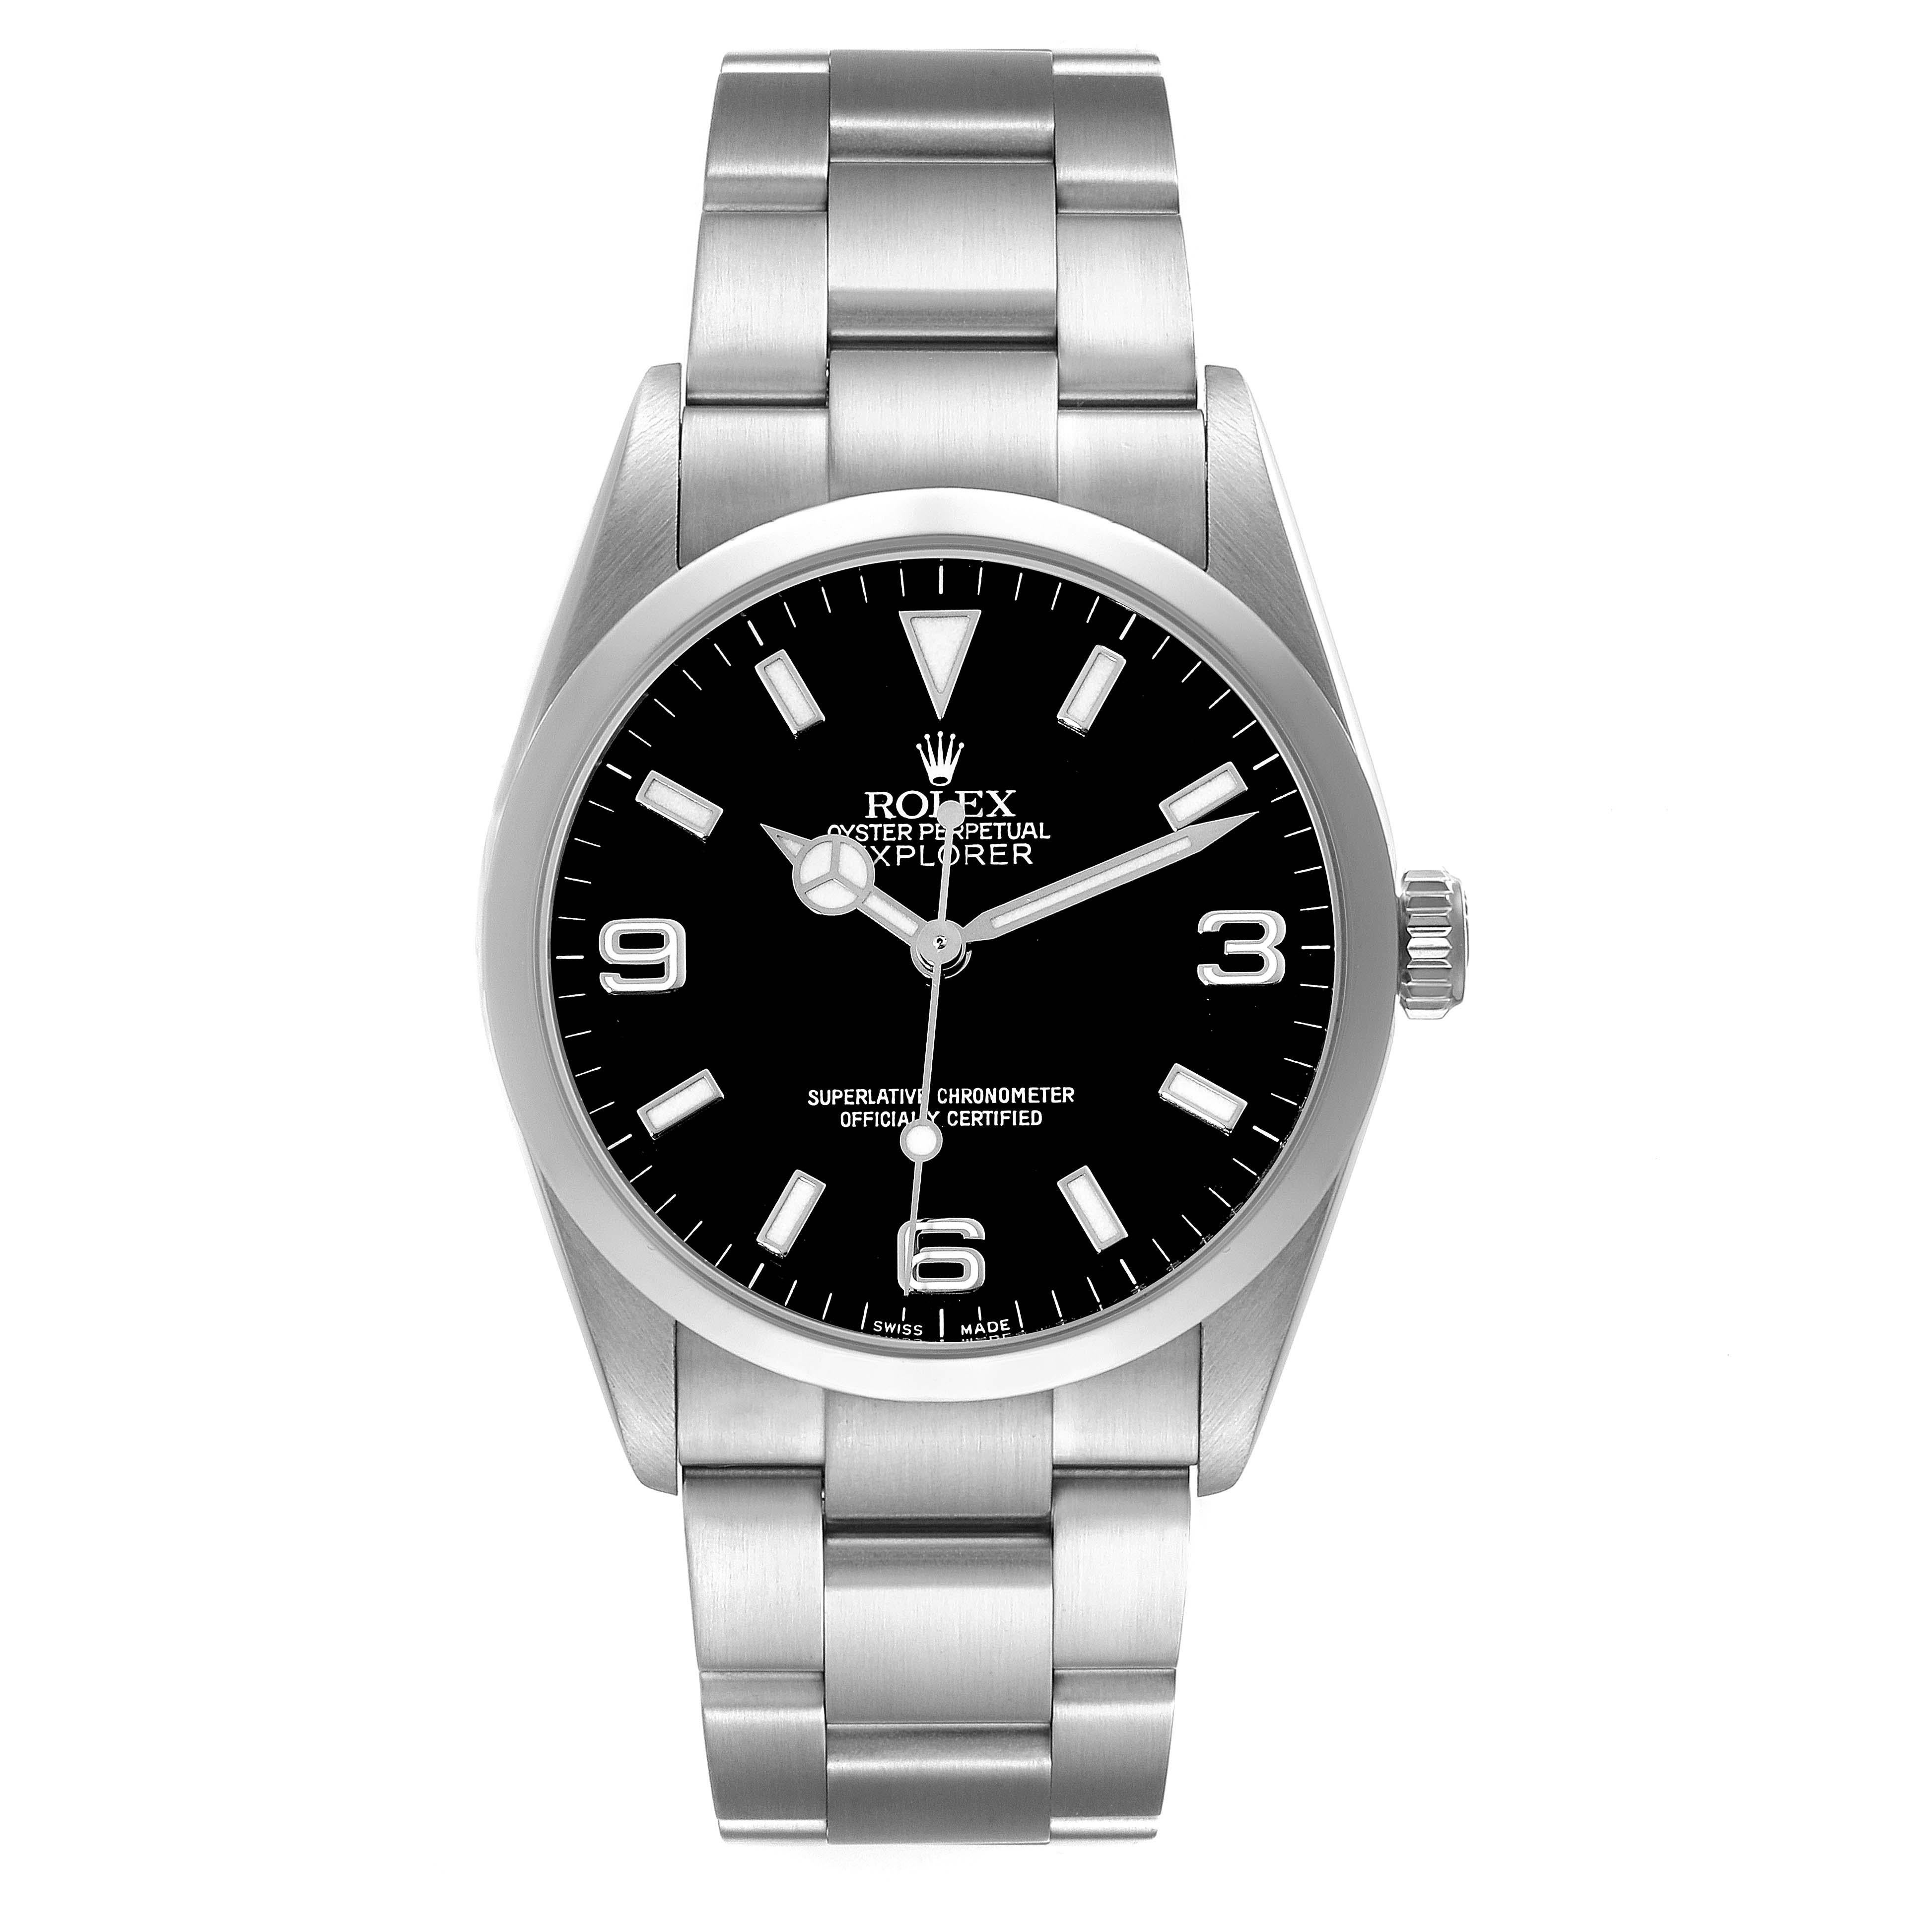 Rolex Explorer I Black Dial Steel Mens Watch 114270 Box Card. Officially certified chronometer automatic self-winding movement. Stainless steel case 36.0 mm in diameter. Rolex logo on the crown. Stainless steel smooth bezel. Scratch resistant